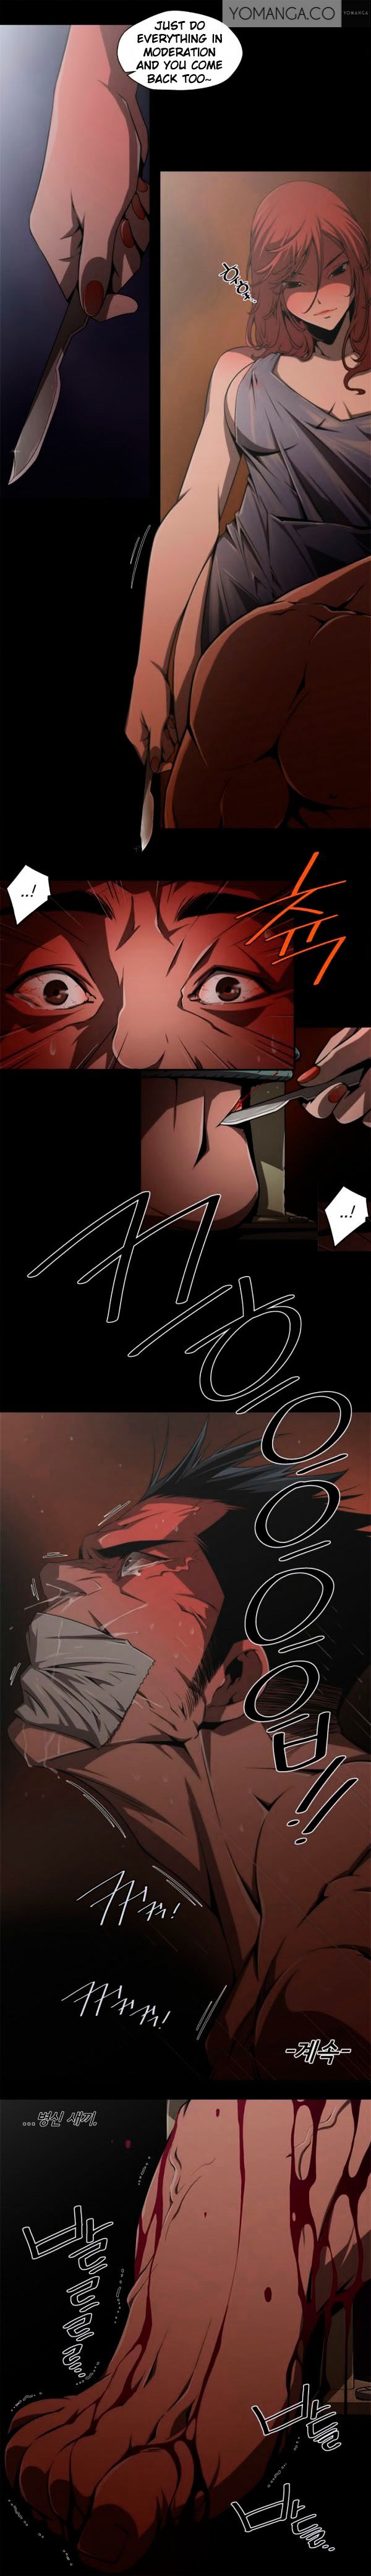 SOW - Chapter 2 Page 9